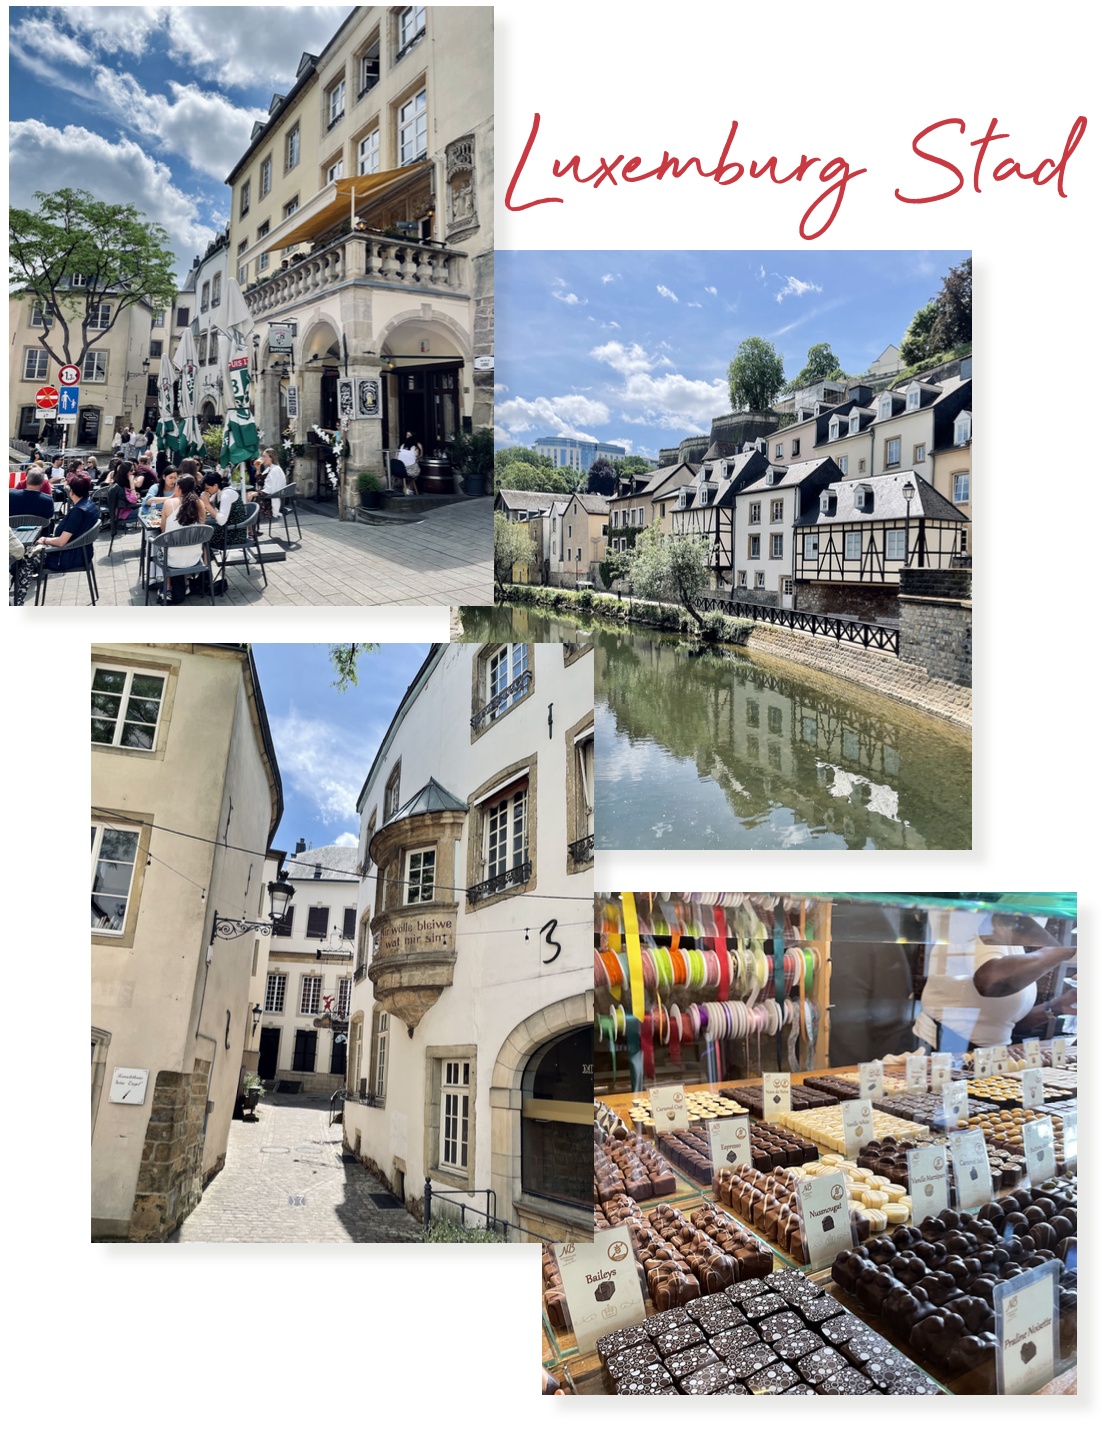 luxemburg stad city guide